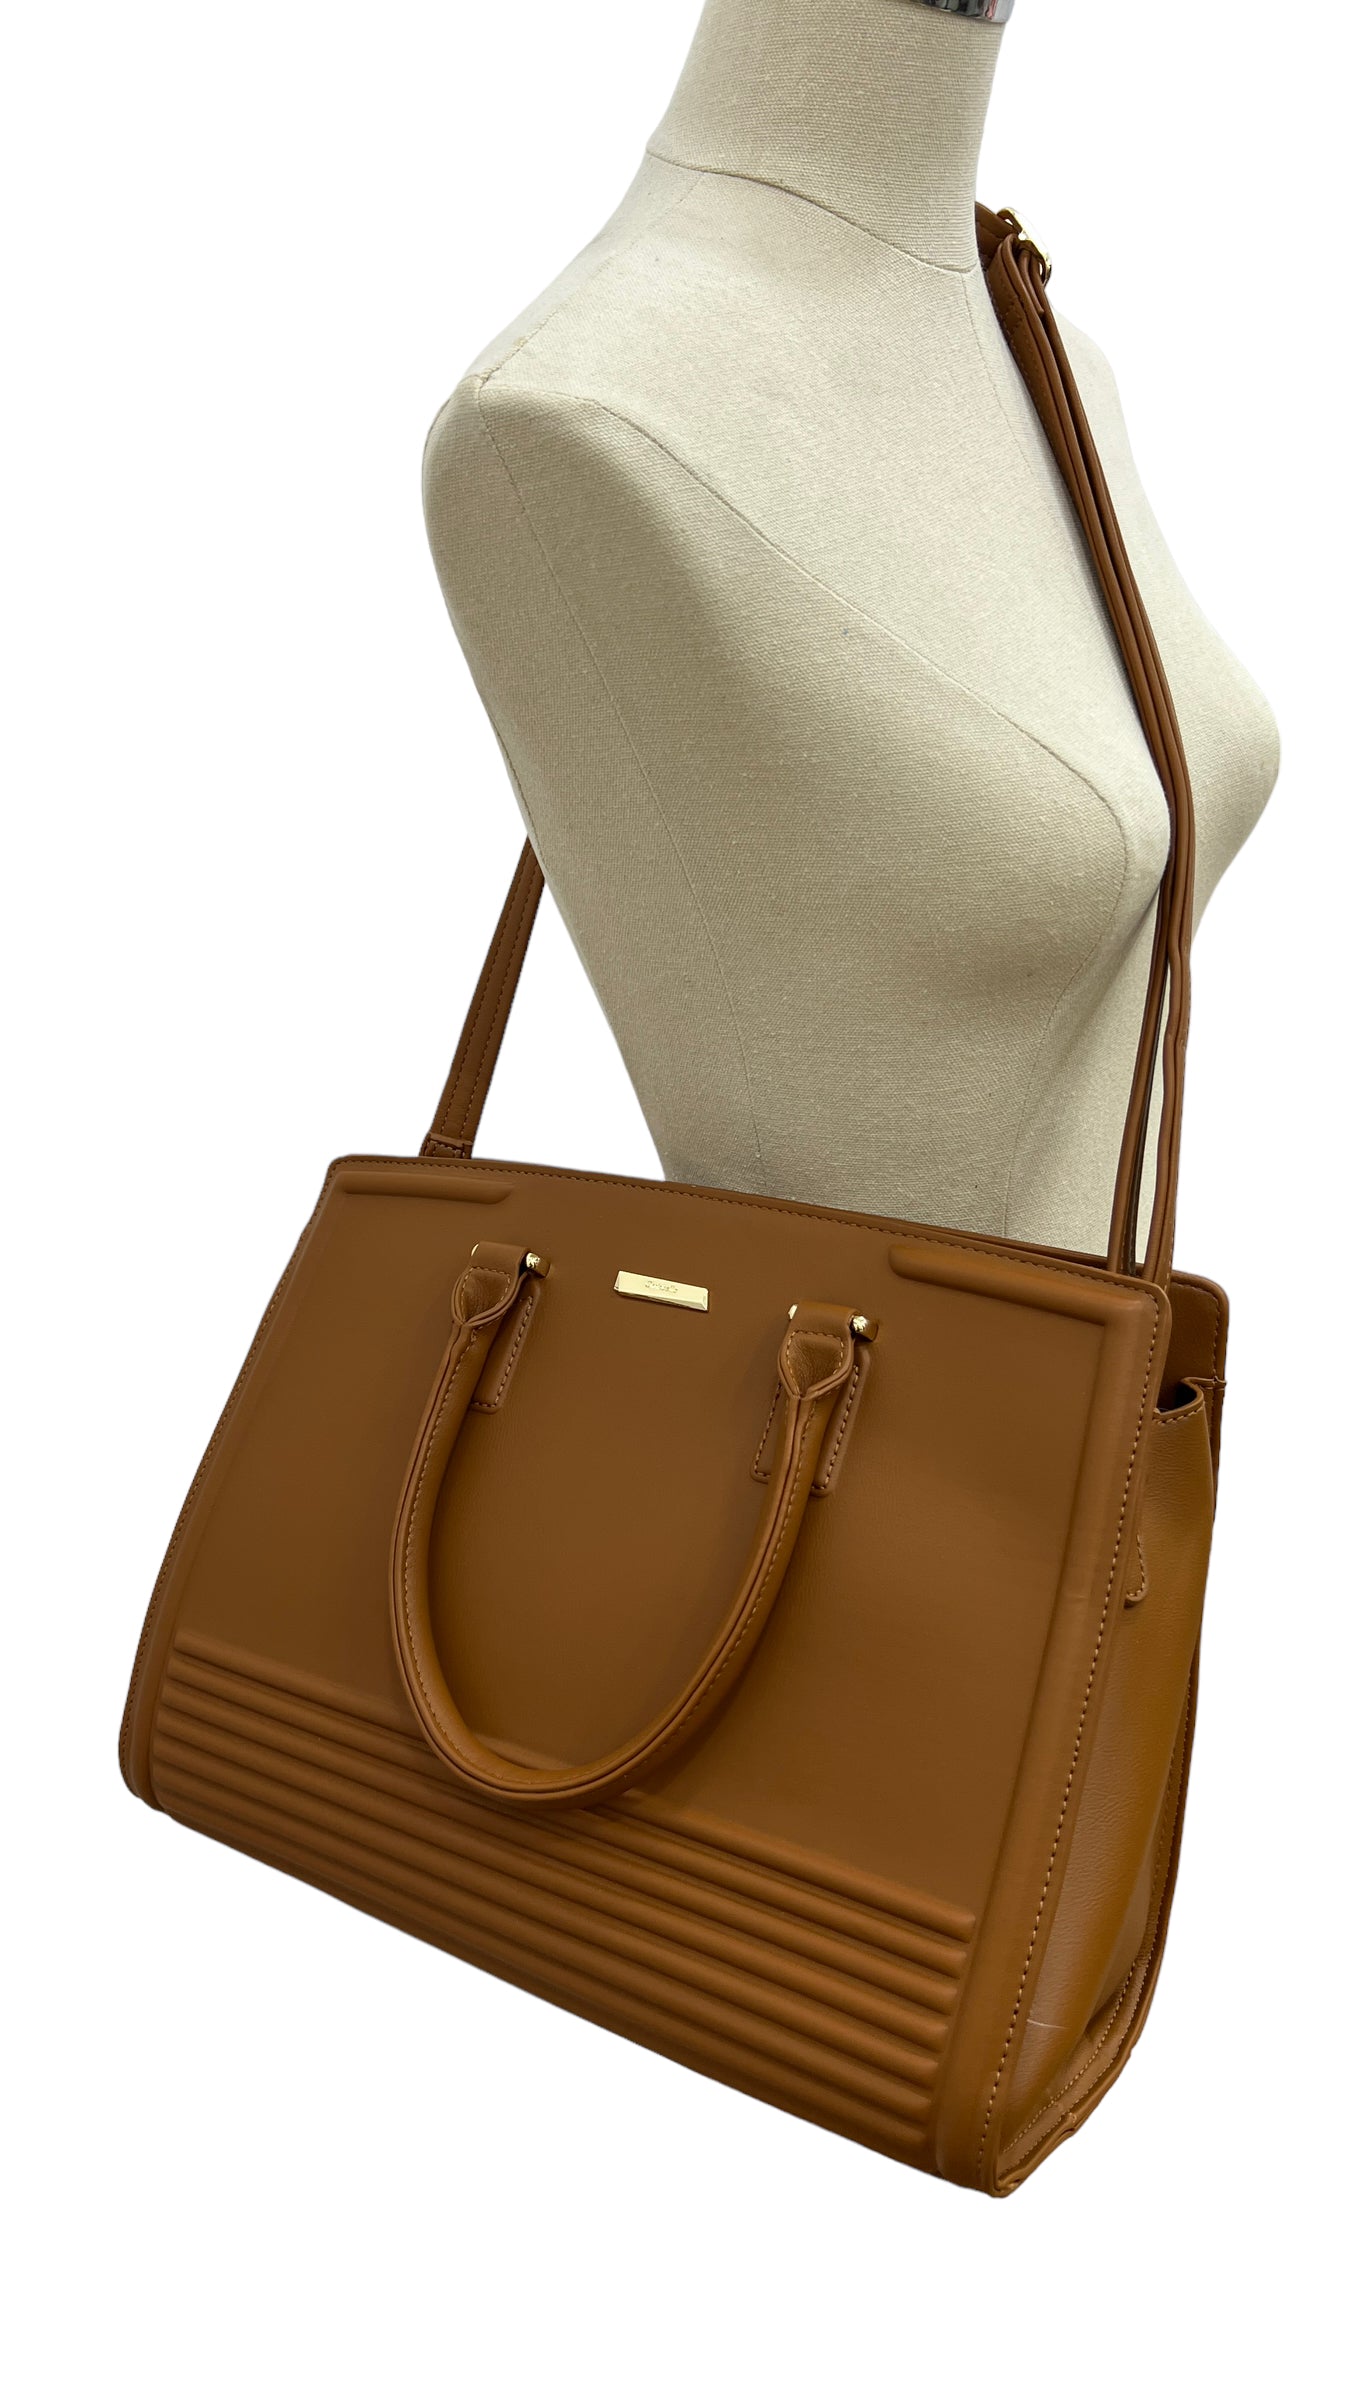 CHRISBELLA TAN LARGE DOUBLE HANDLE STRUCTURED BAG